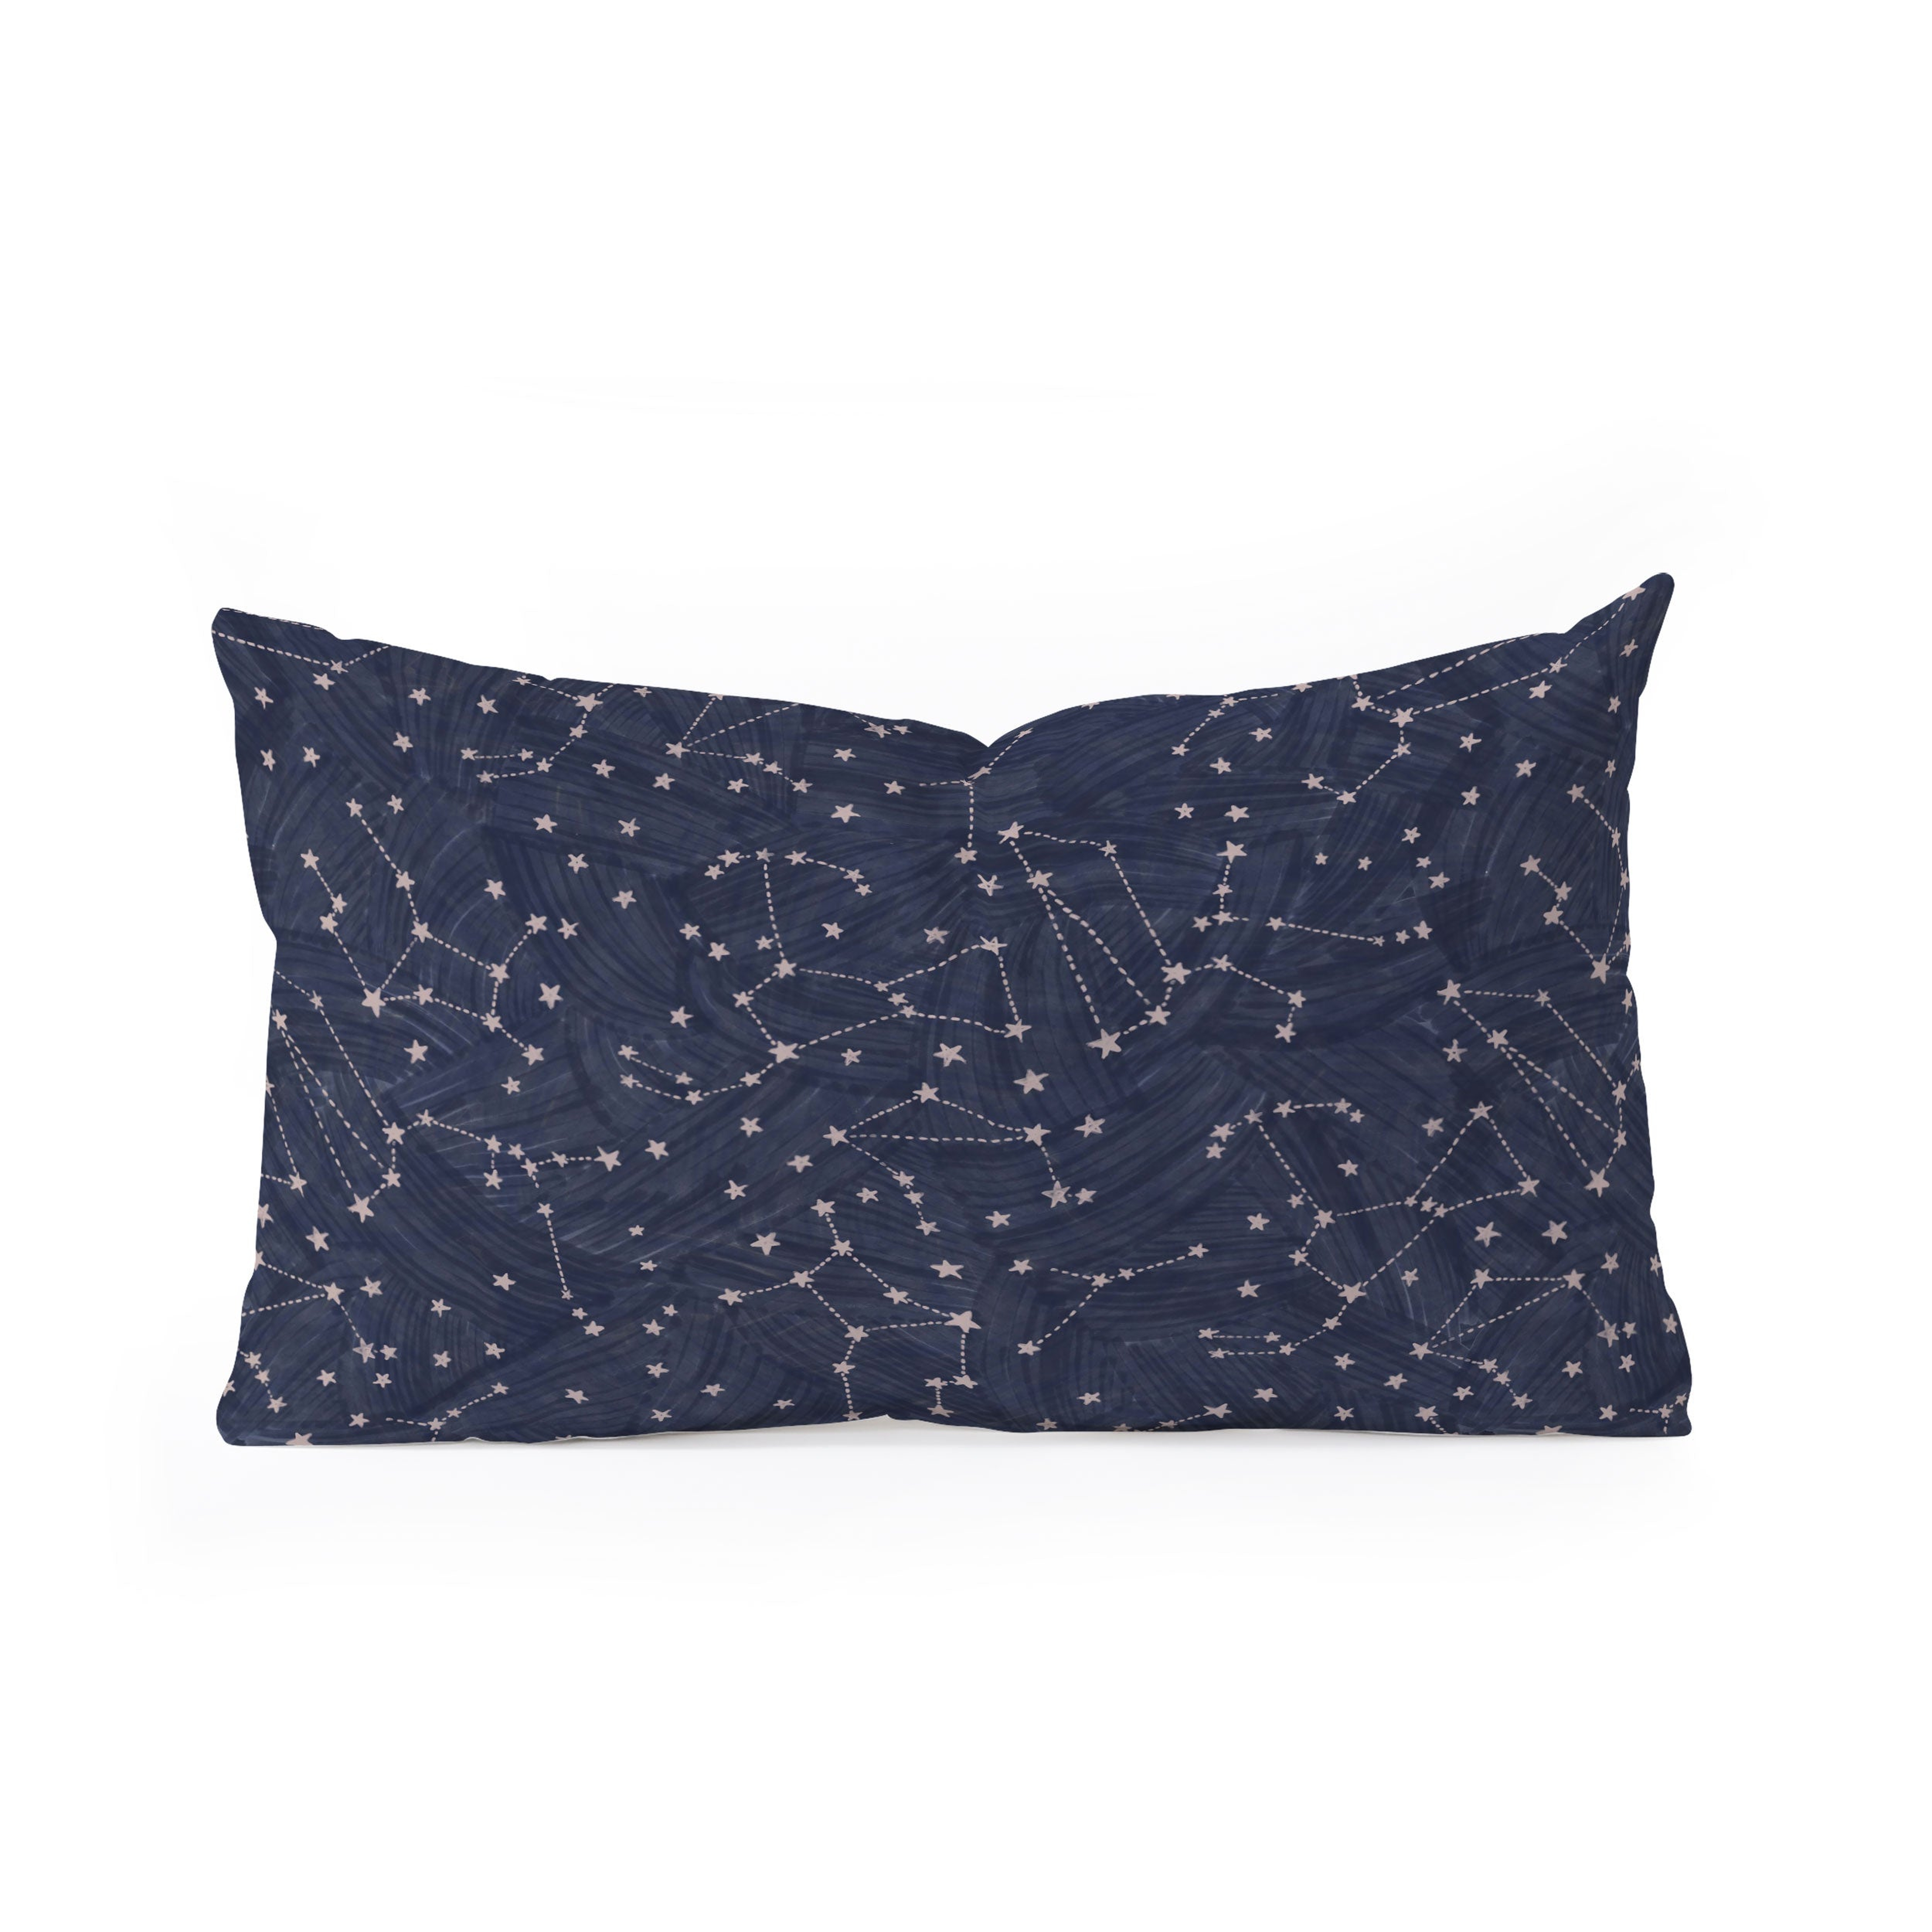 NIGHTS SKY IN NAVY  BY DASH AND ASH - Wander Print Co.